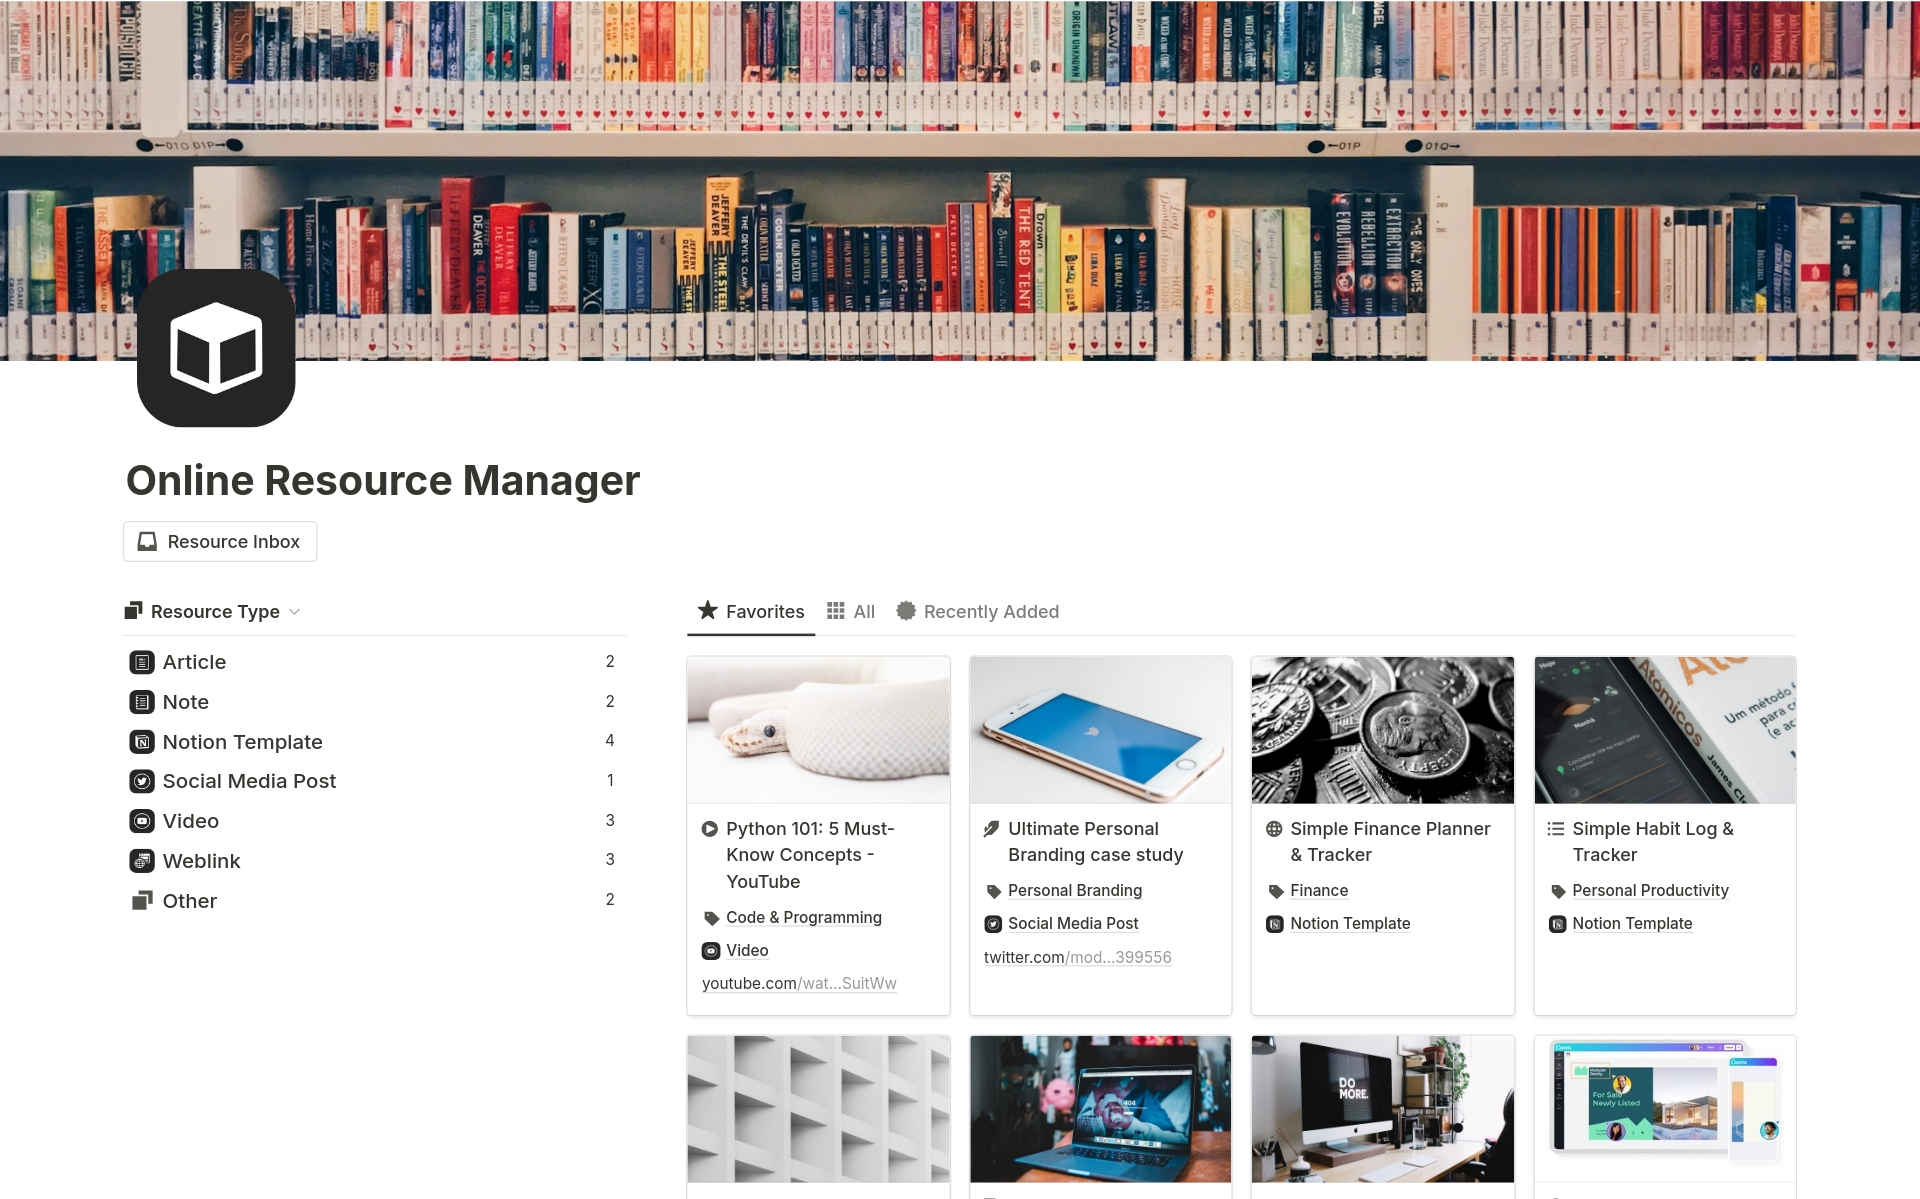 Notion Online Resource Manager is a Notion-based resource organizer designed to capture and organize all links, articles, videos, saved Notion templates, and other valuable online resources.